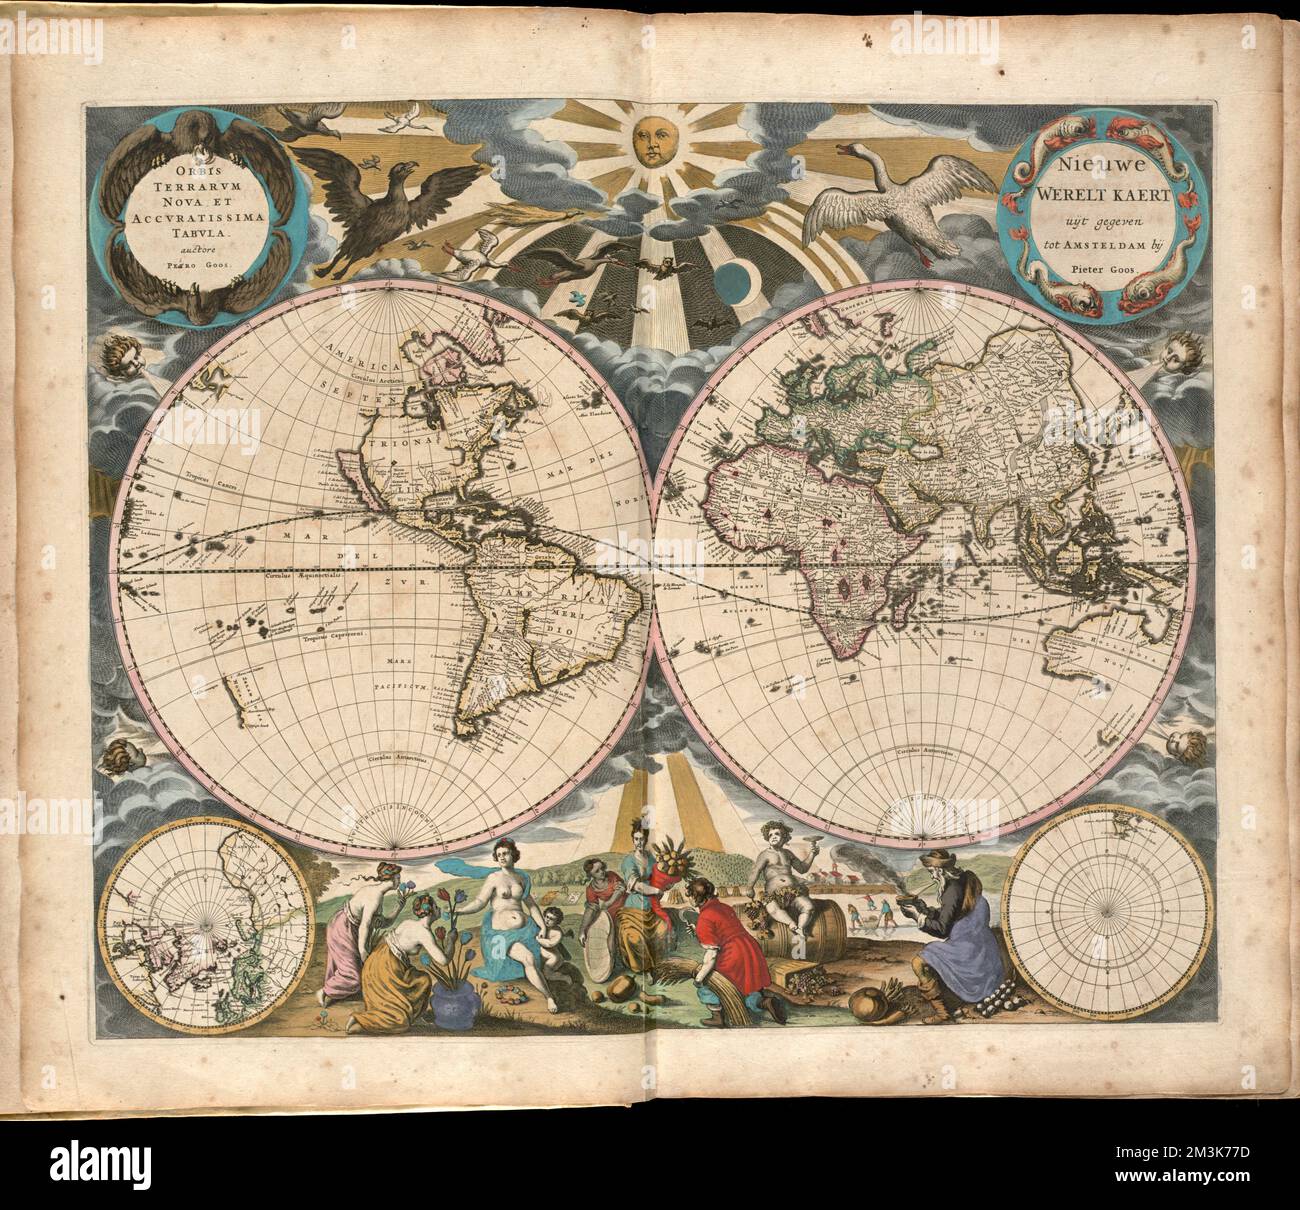 Orbis terrarum nova et accuratissima tabula , World maps, Early works to 1800 Norman B. Leventhal Map Center Collection Stock Photo